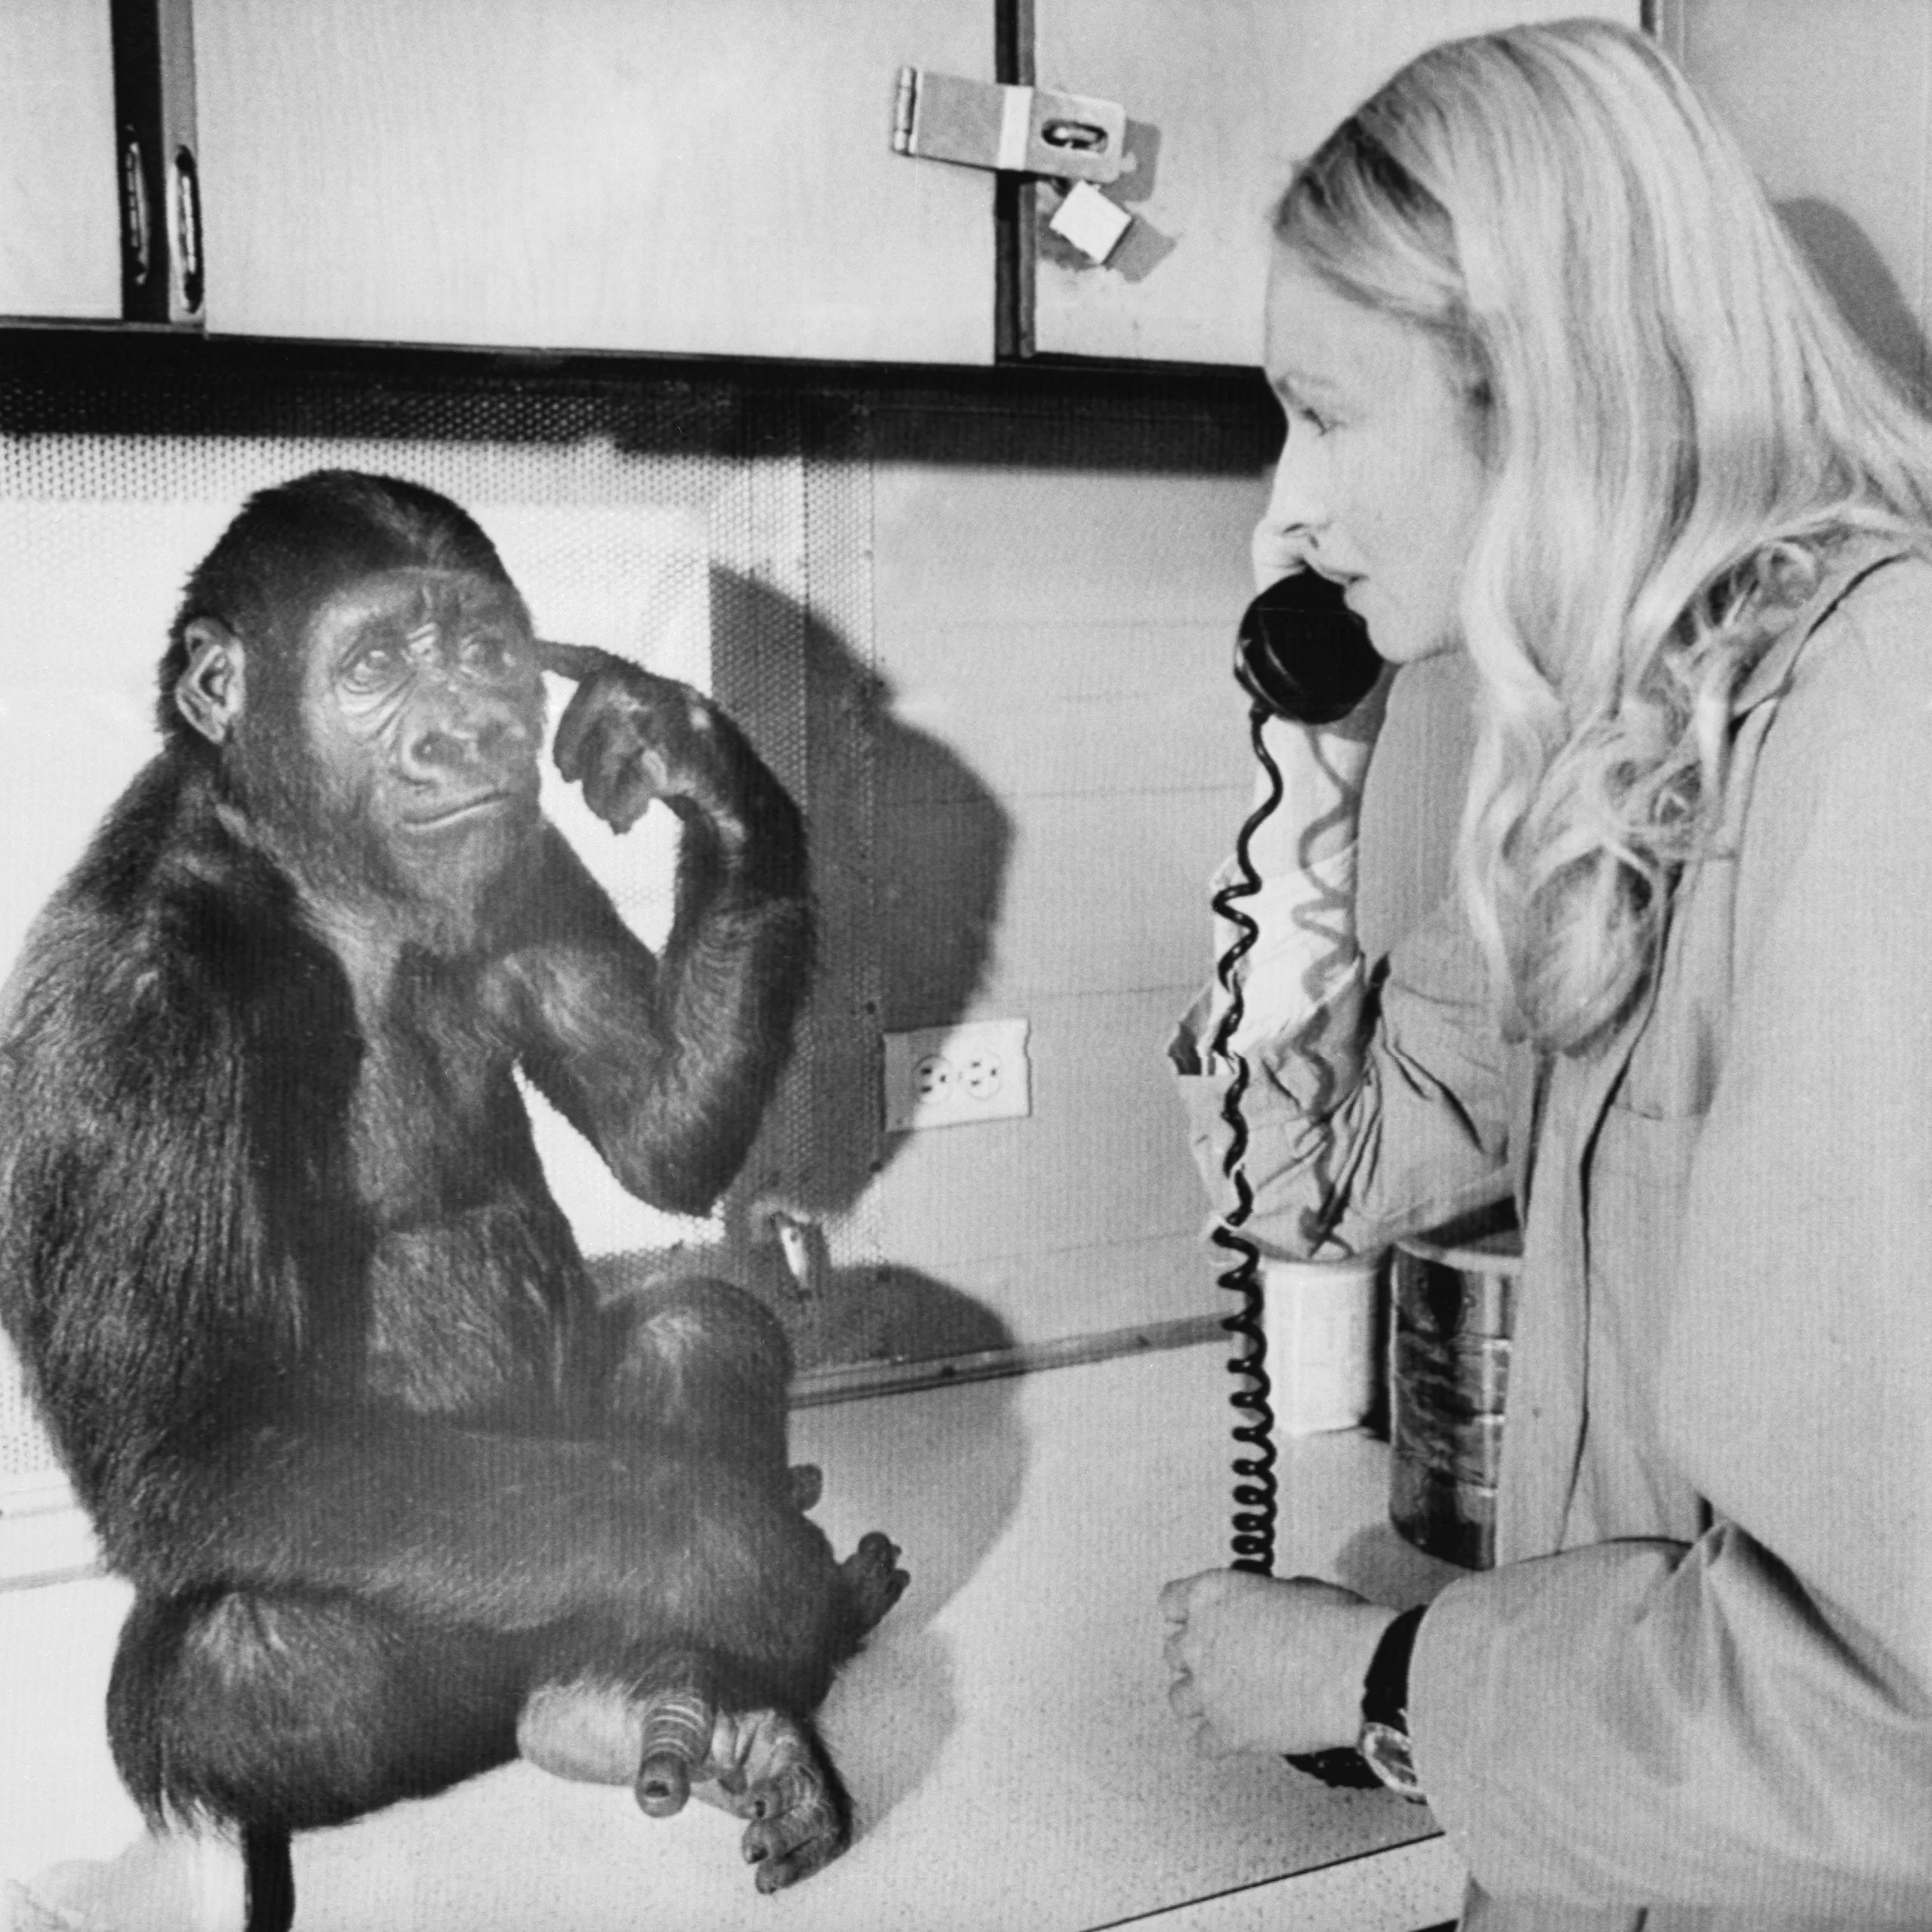 The young gorilla, Koko, signs with Penny Patterson, who is holding a phone.